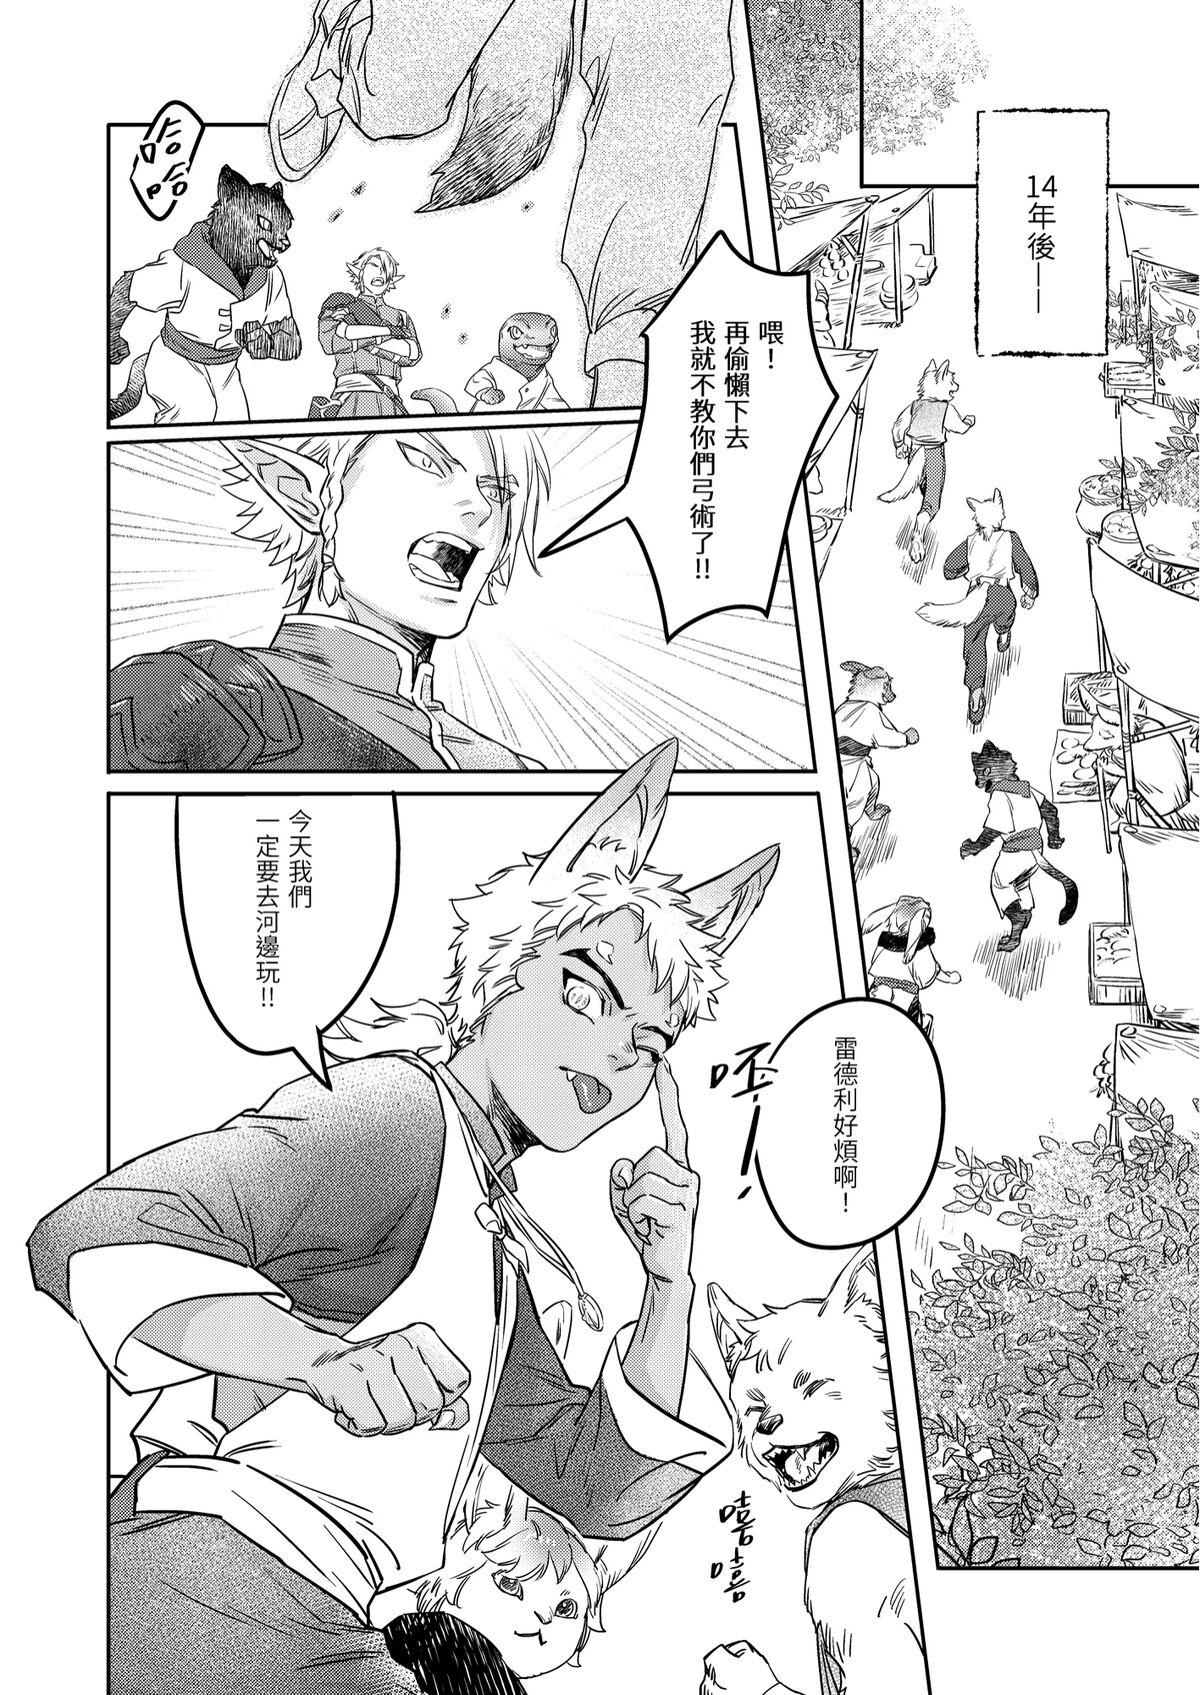 Reverse Cowgirl 精靈與半獸人 - Original Foreplay - Page 10